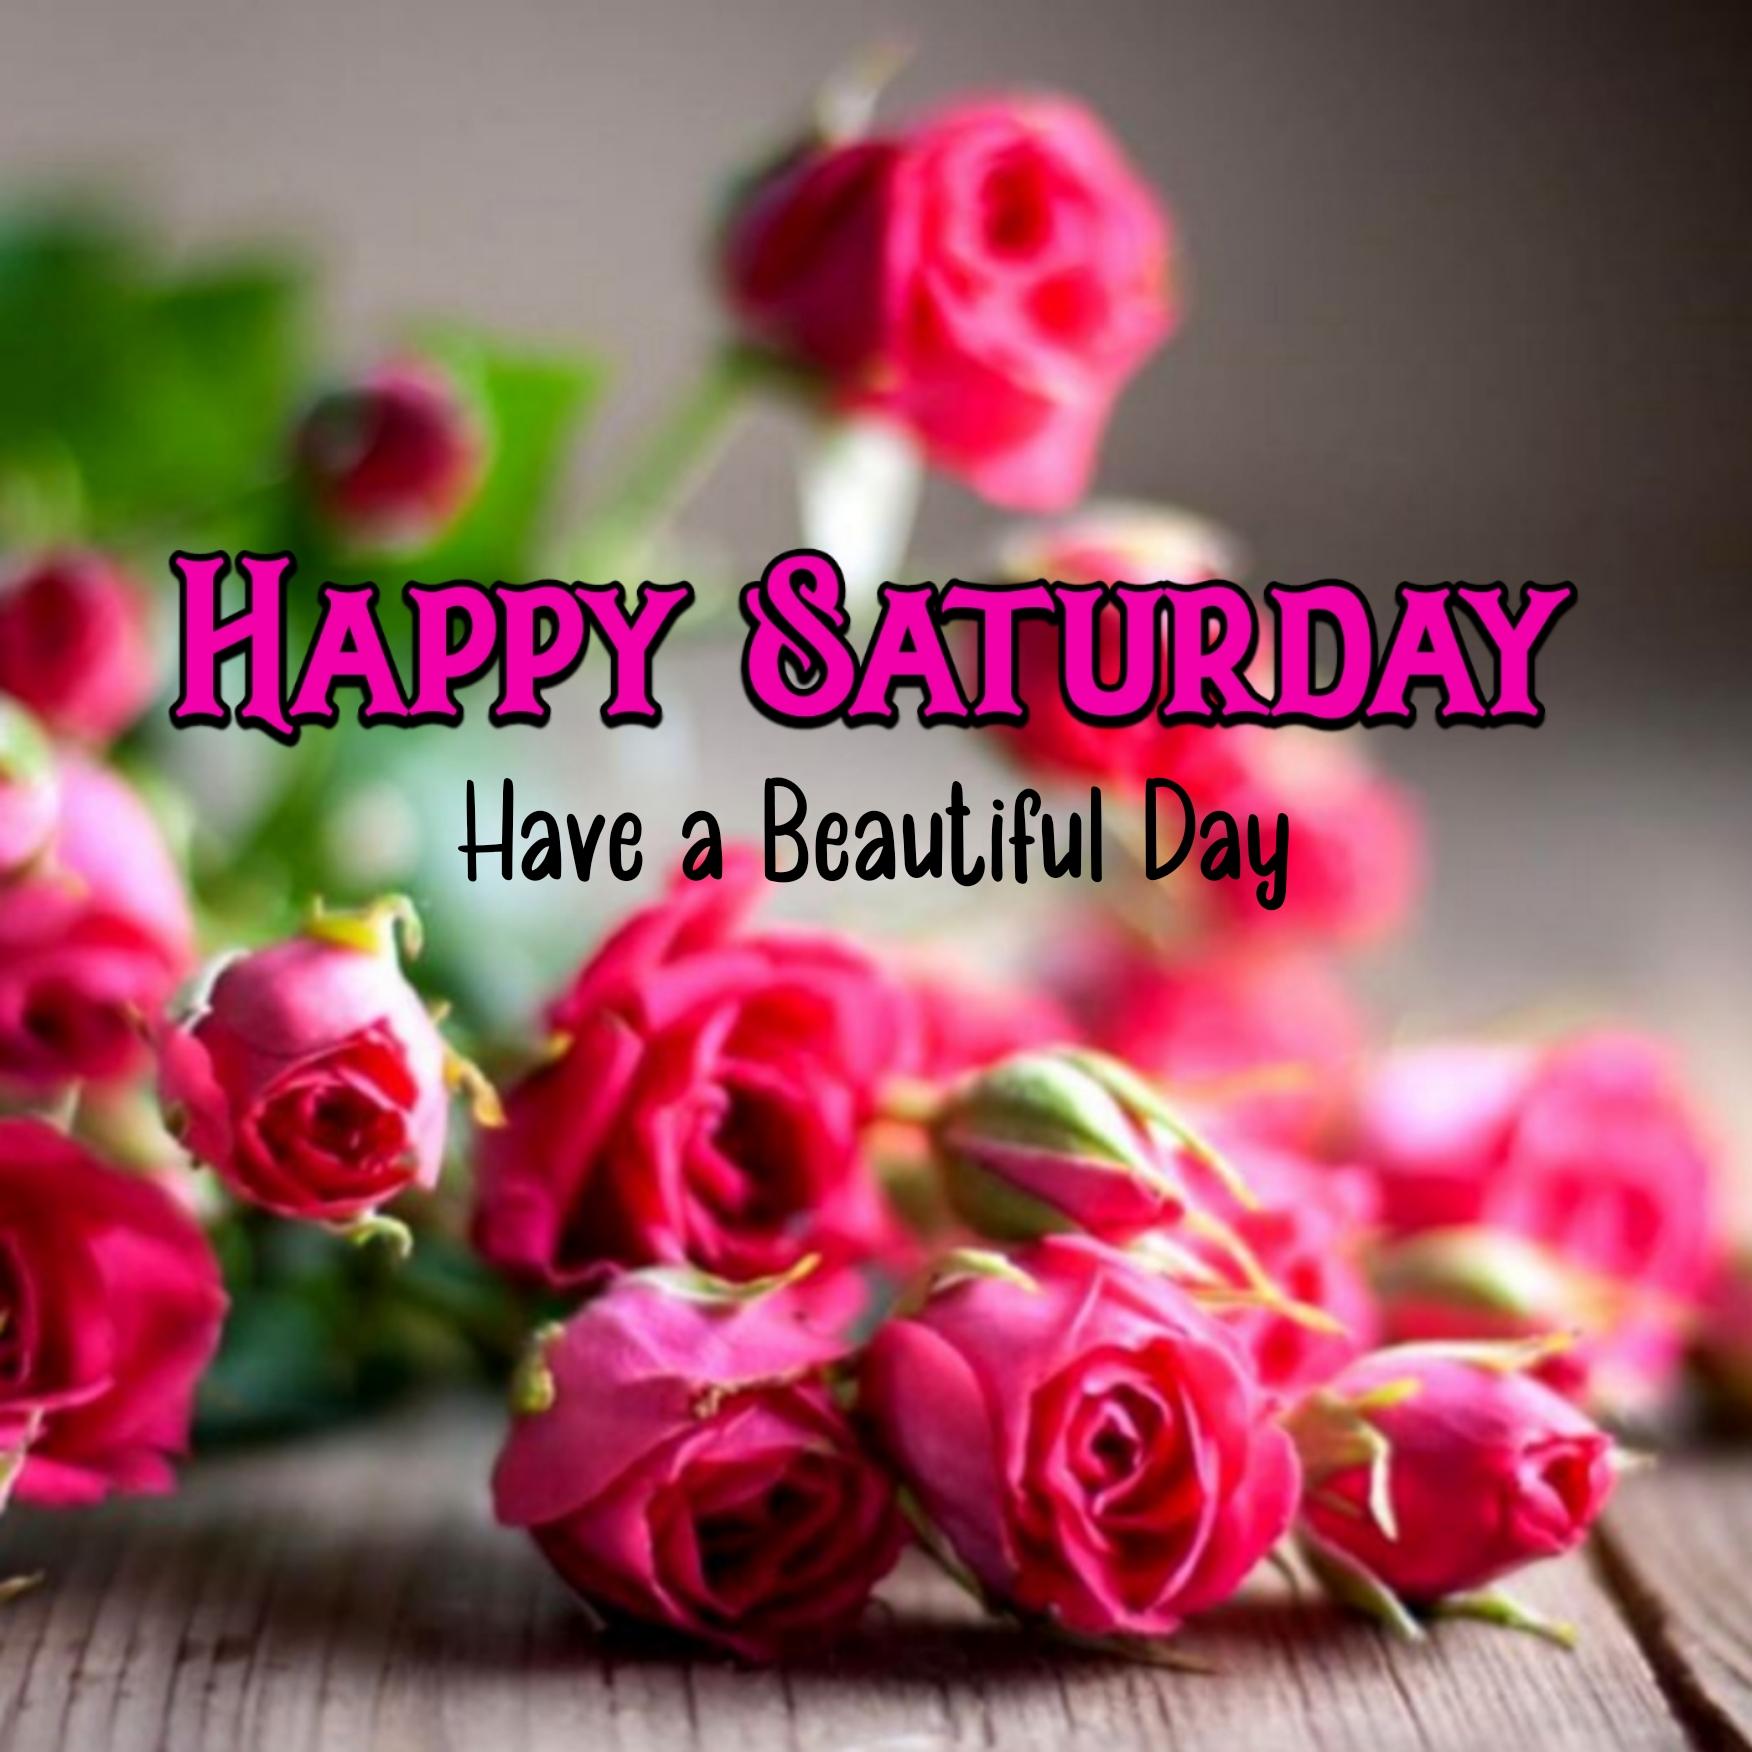 Happy Saturday Have A Beautiful Day Images